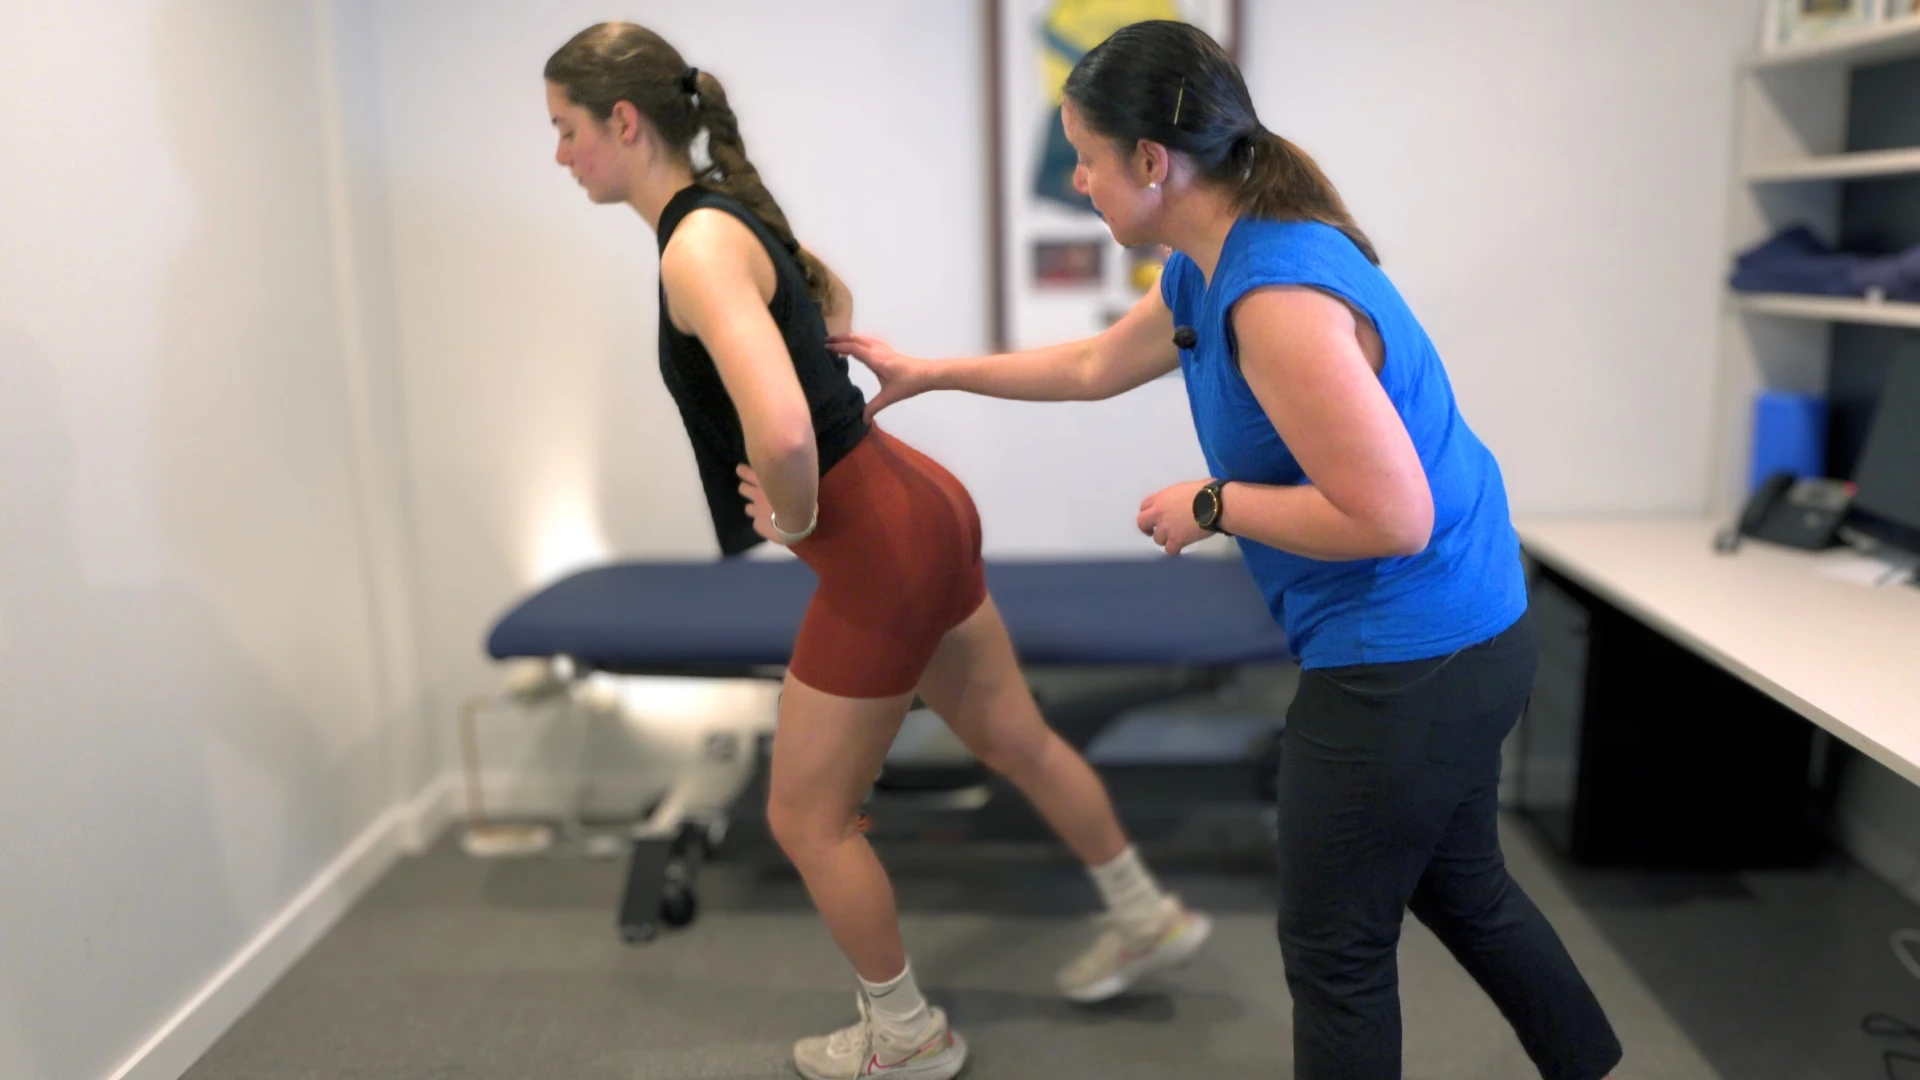 14. Assess function, motor control and range of movement in low back pain patients. Part 1 with Paula Peralta